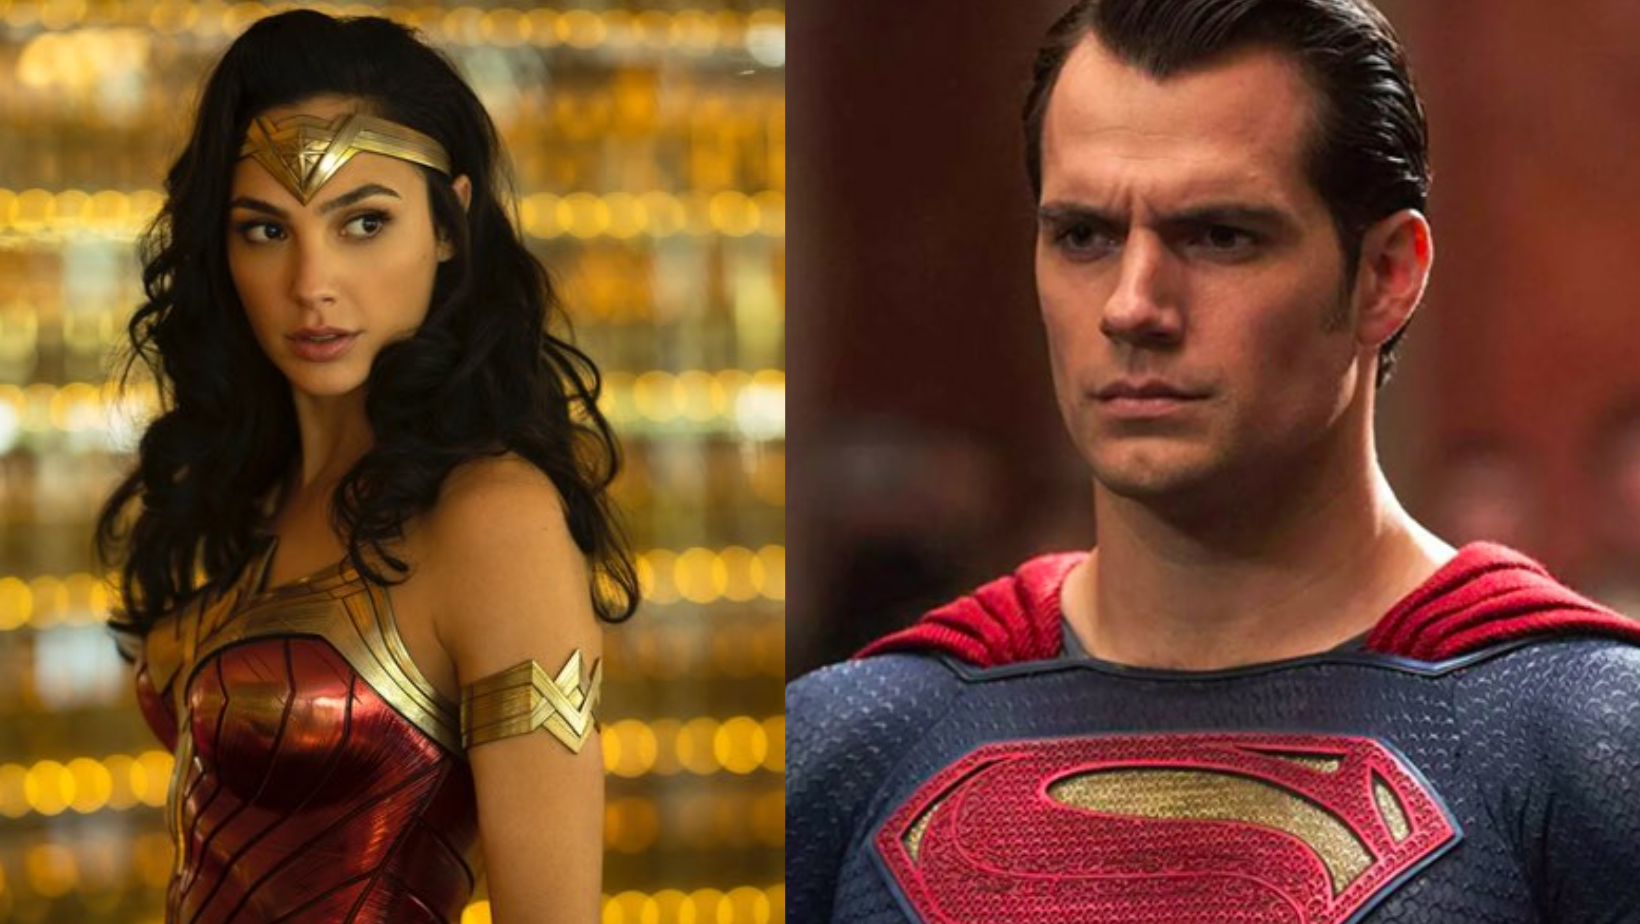 Henry Cavill and Gal Gadot: Just Forgotten or Left Behind in James Gunn’s Plan for the DCEU

+2023